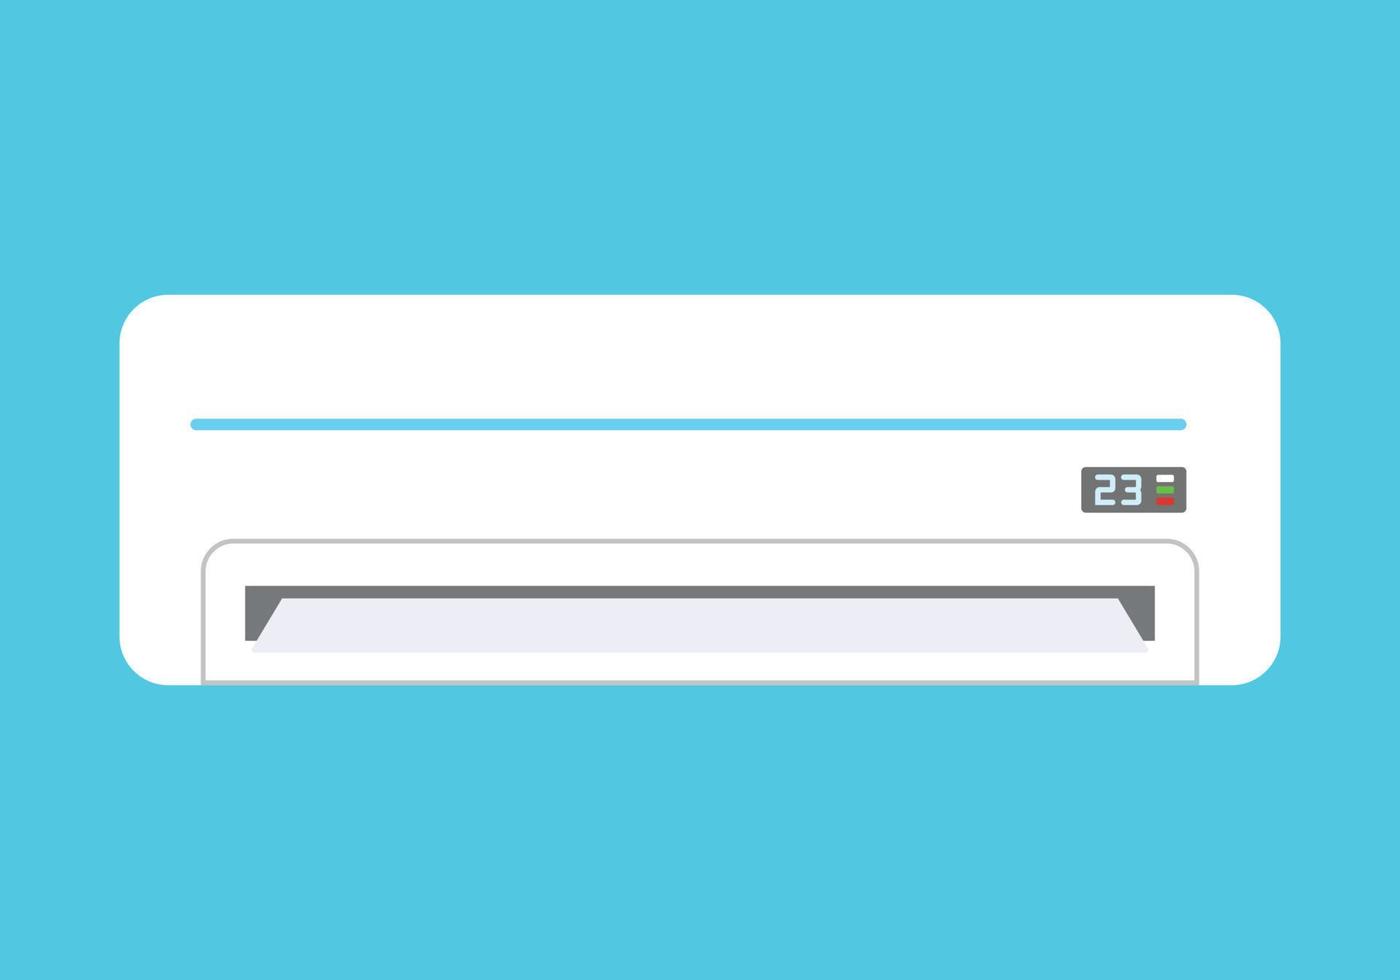 Animated AC Air Conditioner Icon Clipart Vector Image